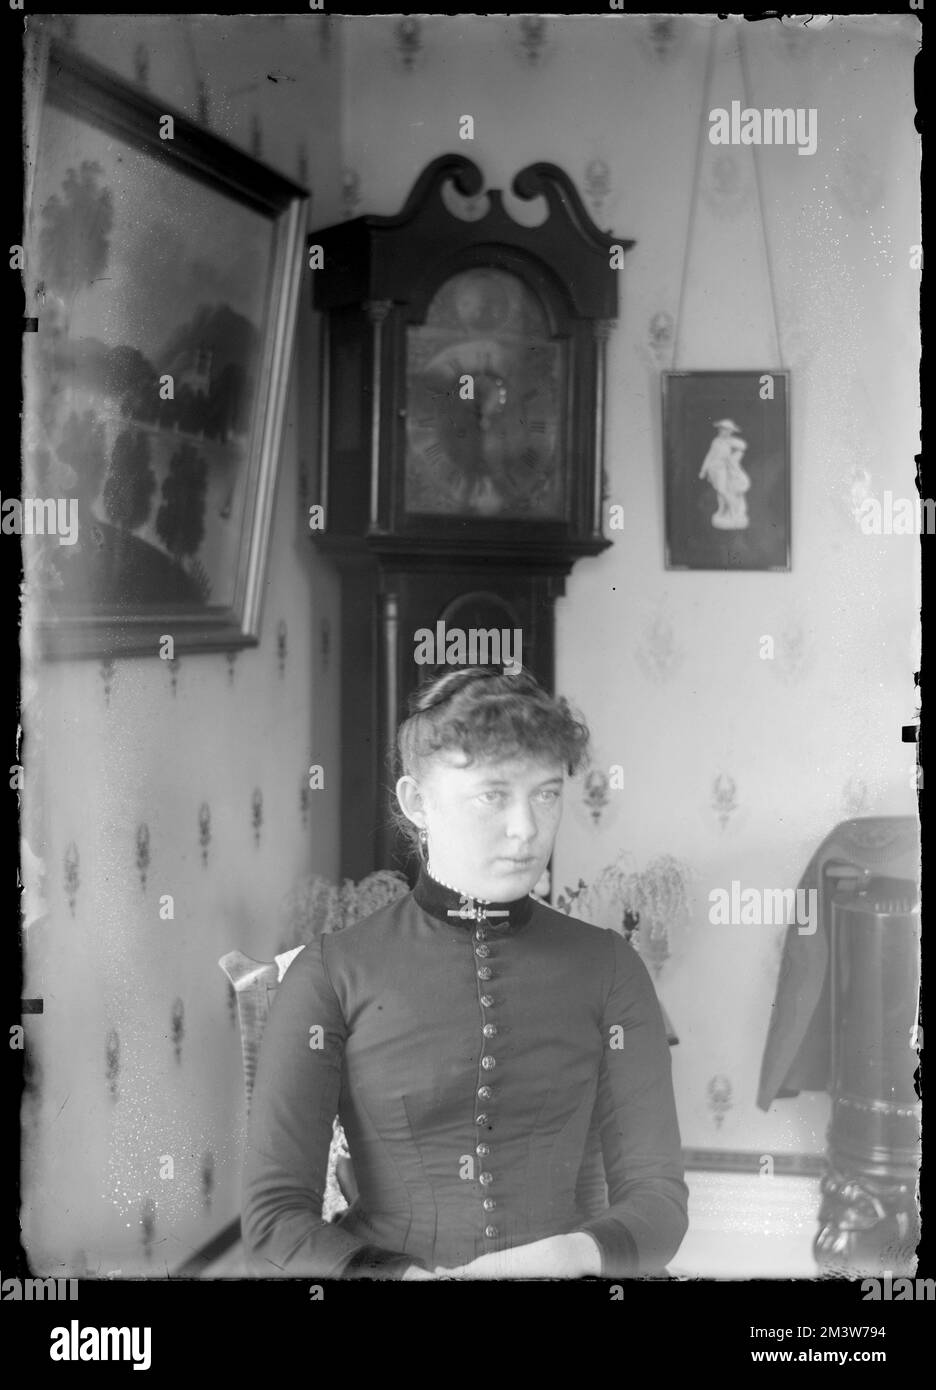 Stella Good sitting in front of grandfather clock , People. Hingham Public Library Glass Slide Collection Stock Photo